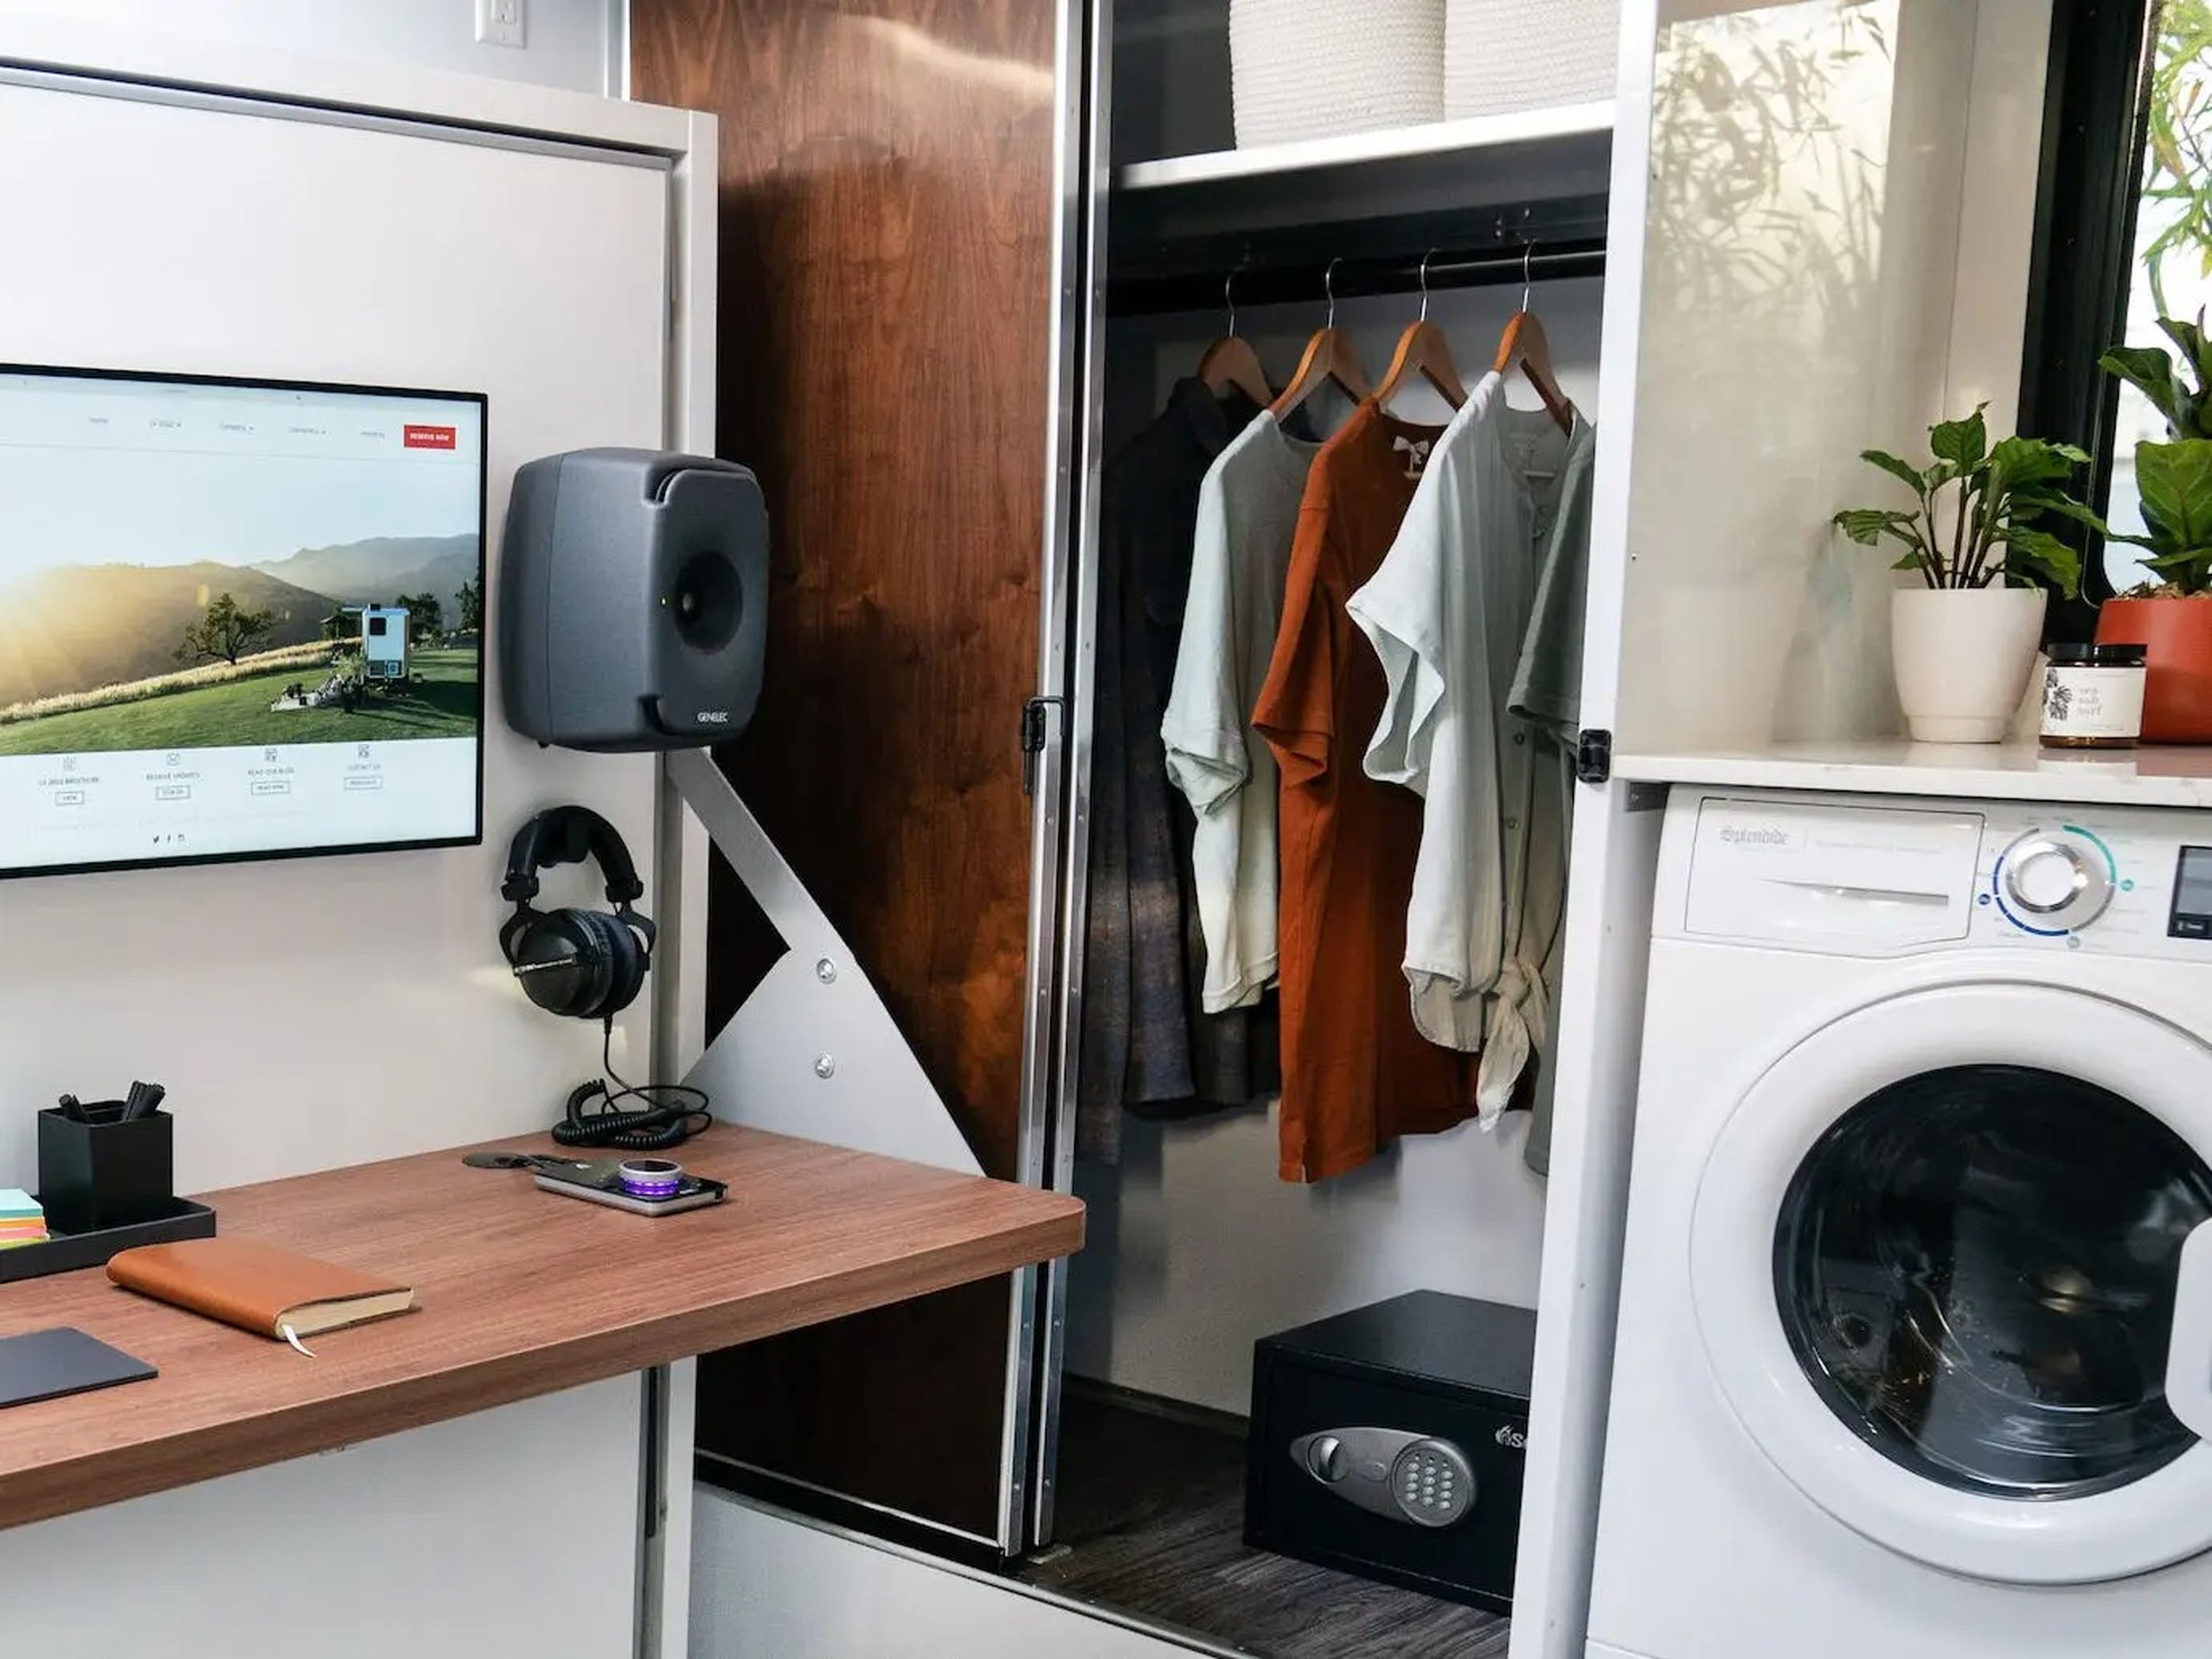 An office space with Apple products like a laptop next to a washer, closet.